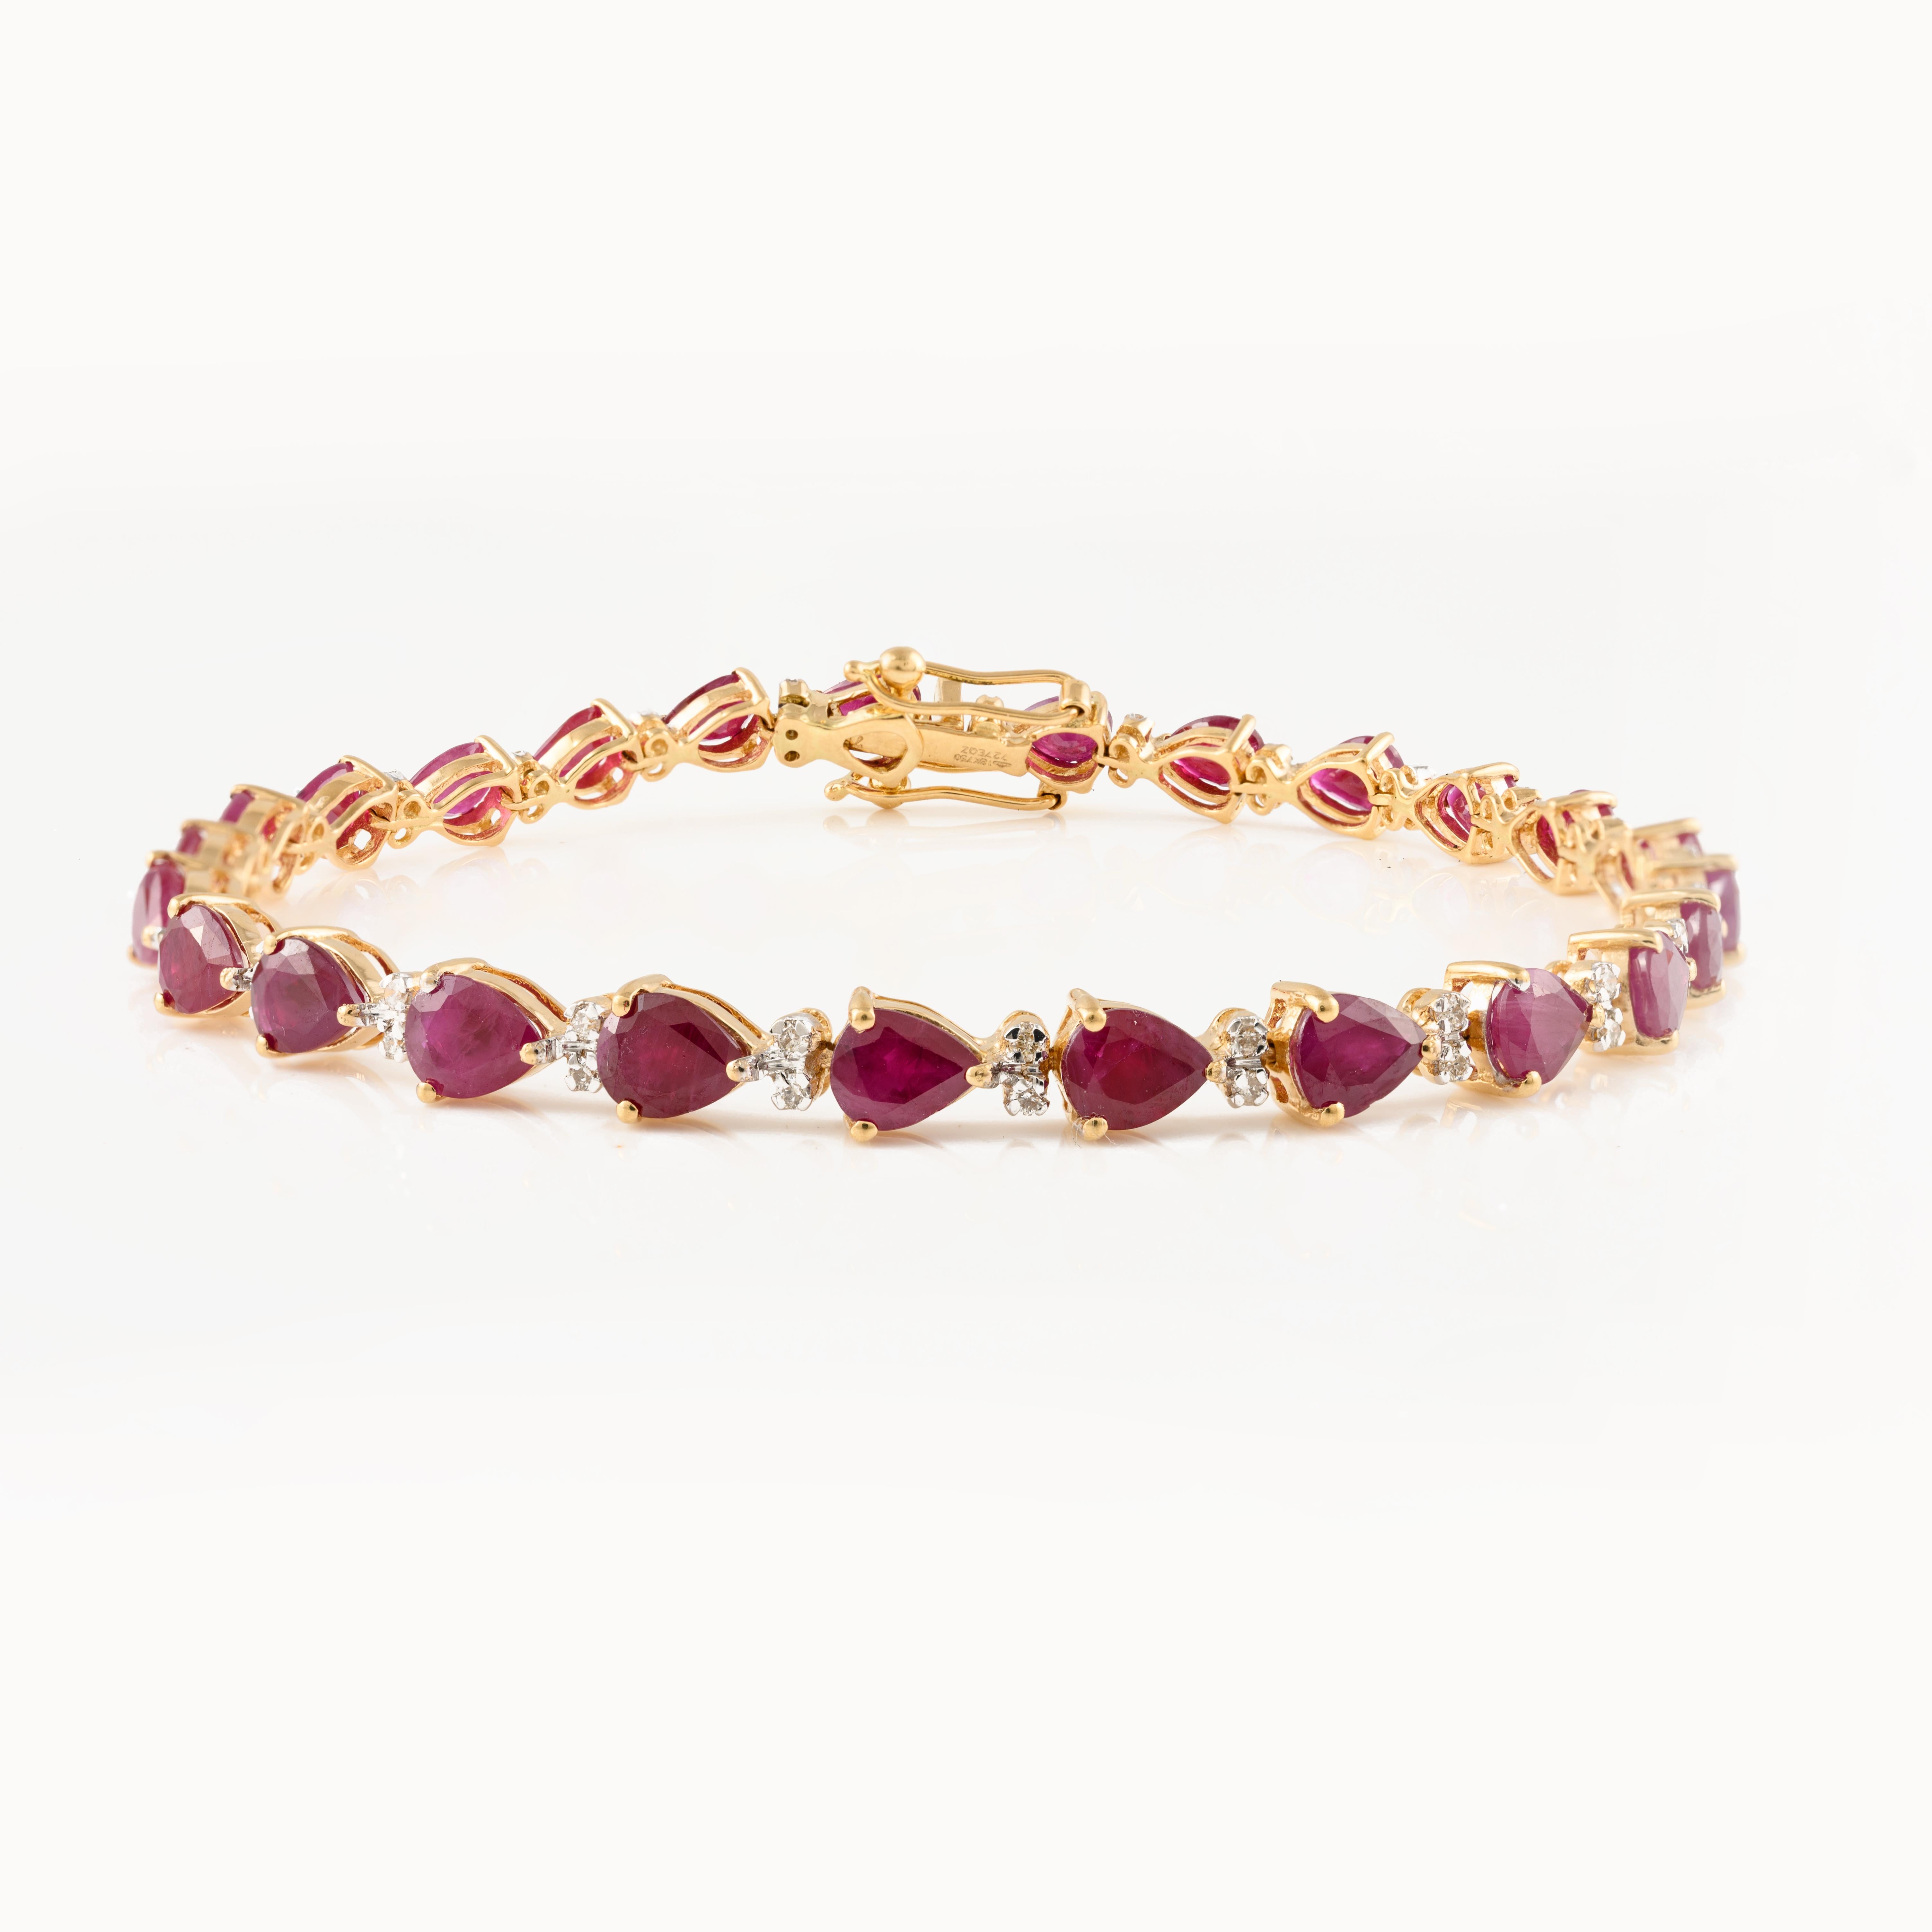 This Ruby Diamond Tennis Bracelet in 18K gold showcases 25 endlessly sparkling natural ruby, weighing 9.51 carats and 50 pieces of diamonds weighing 0.35 carats. It measures 7 inches long in length. 
Ruby improves mental strength. 
Designed with